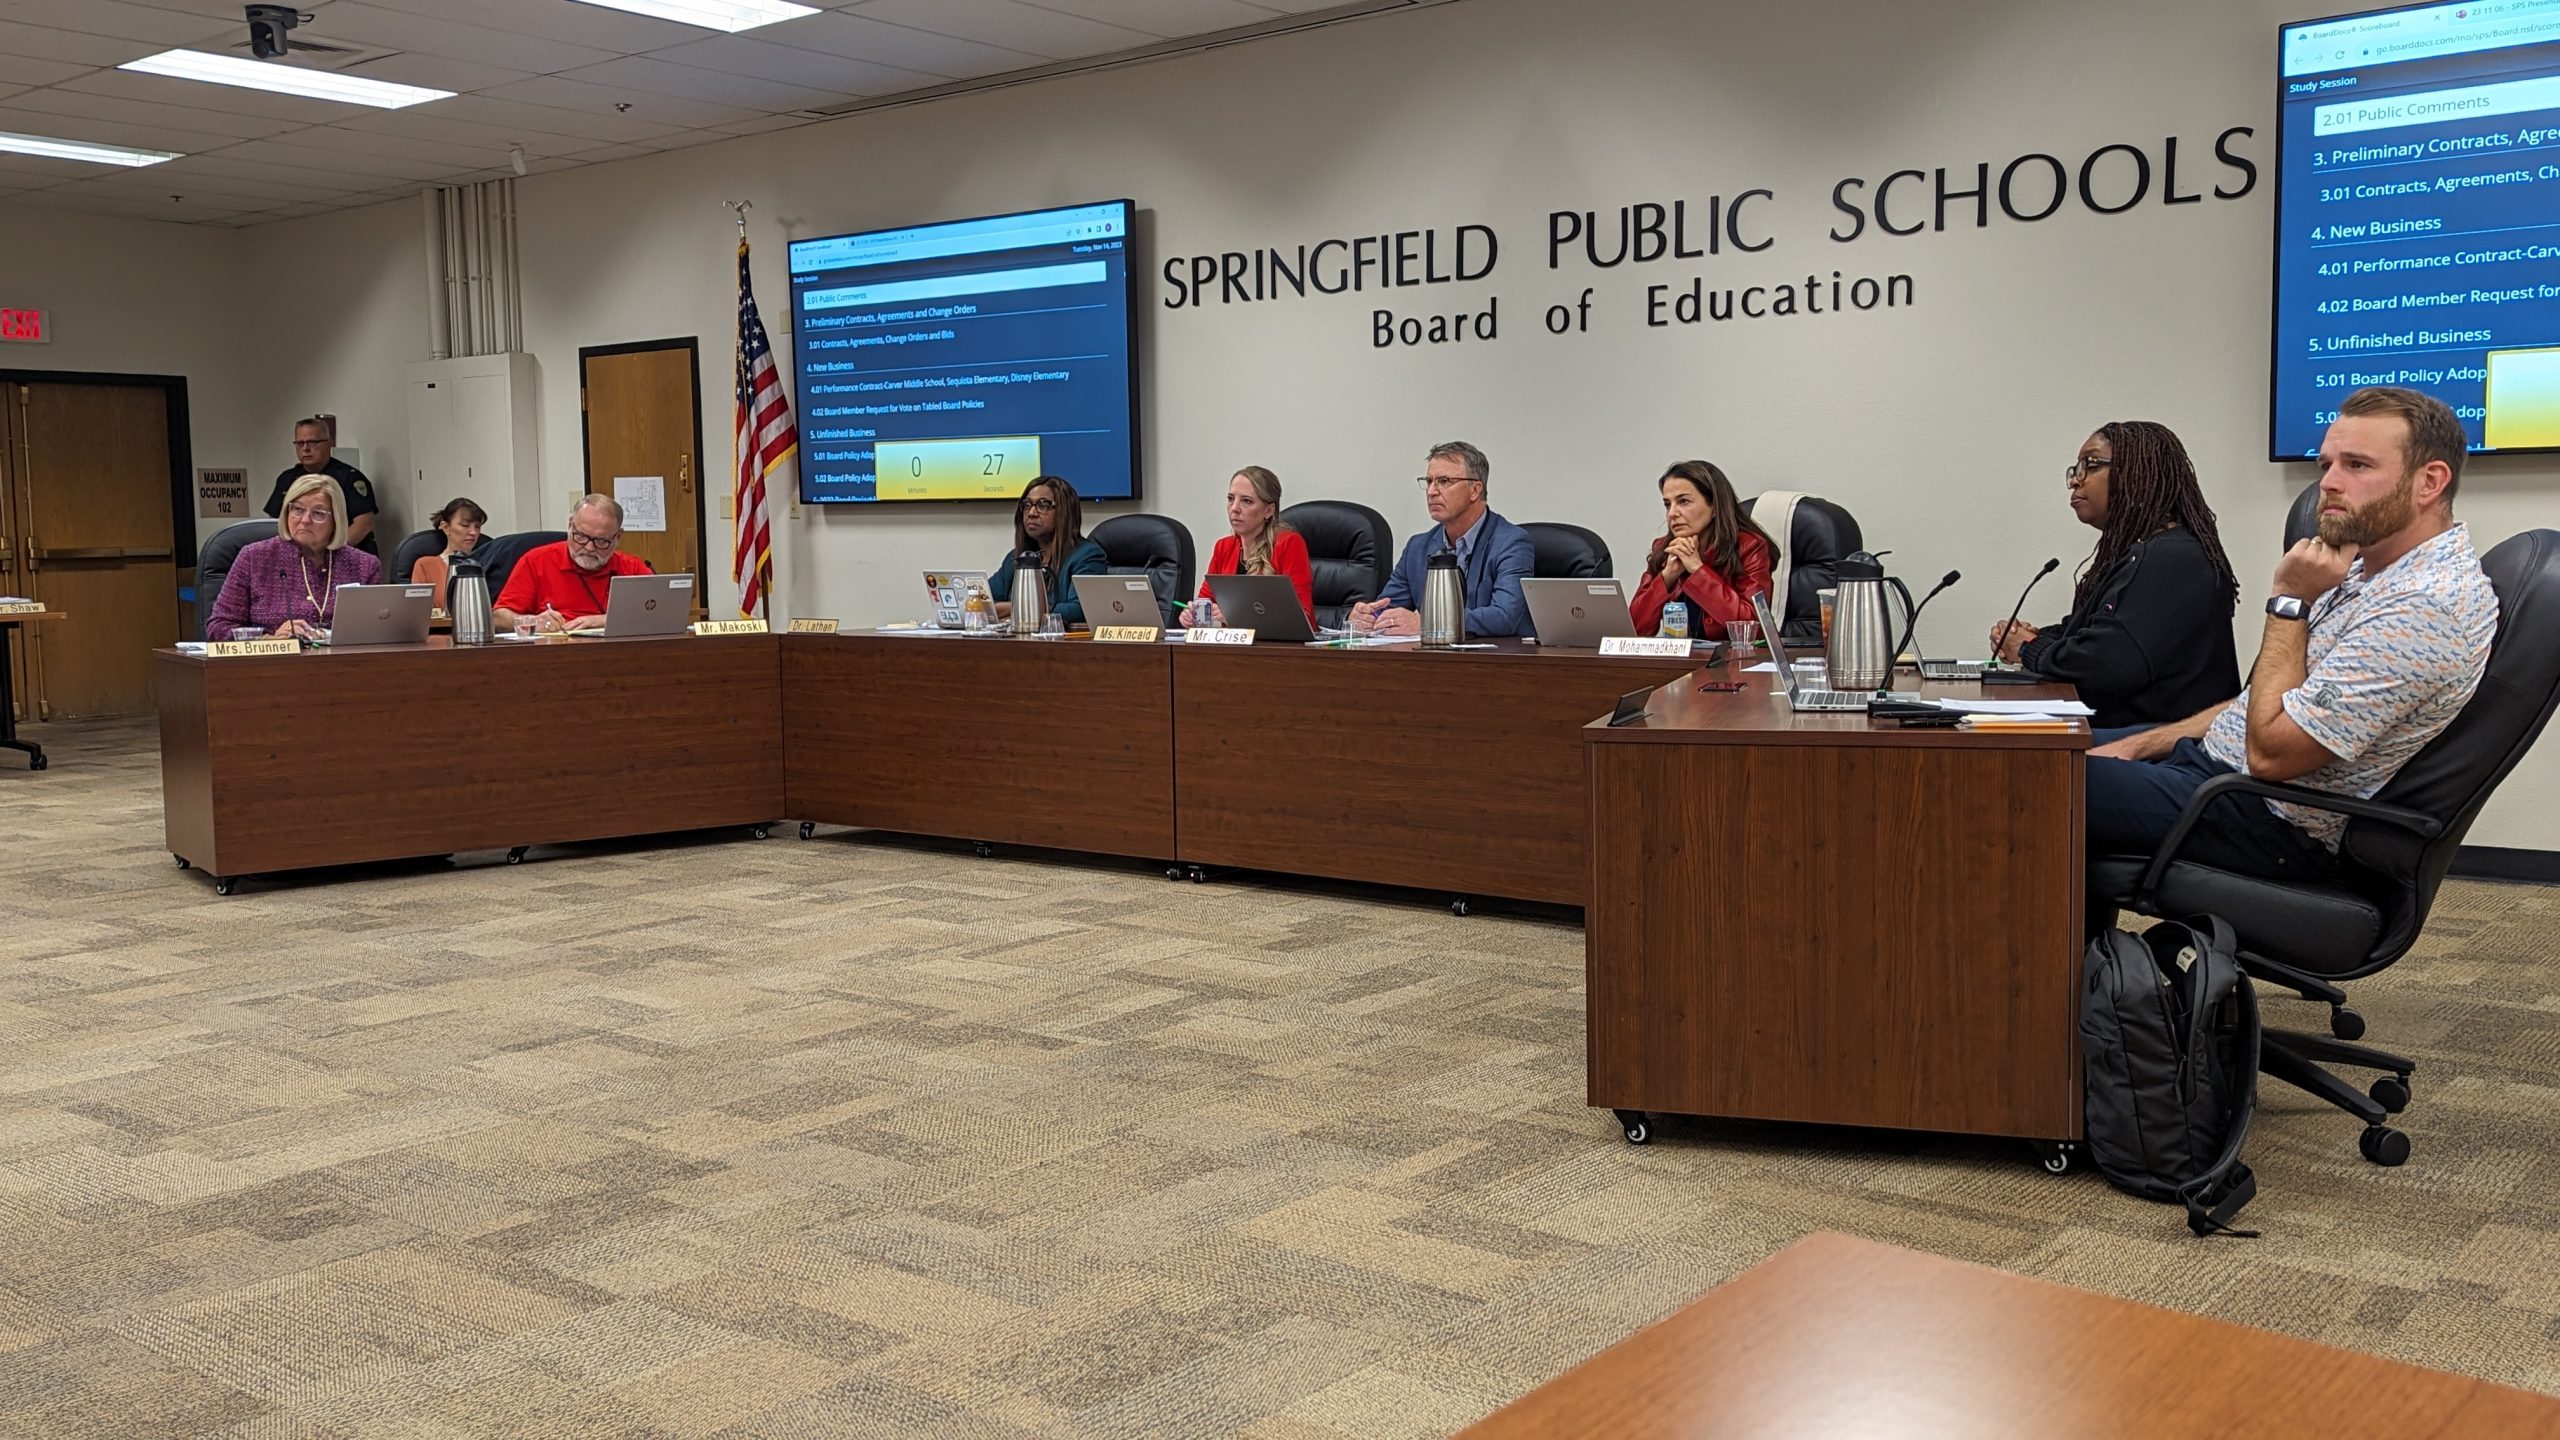 8 candidates to run for 3 seats on Springfield Board of Education